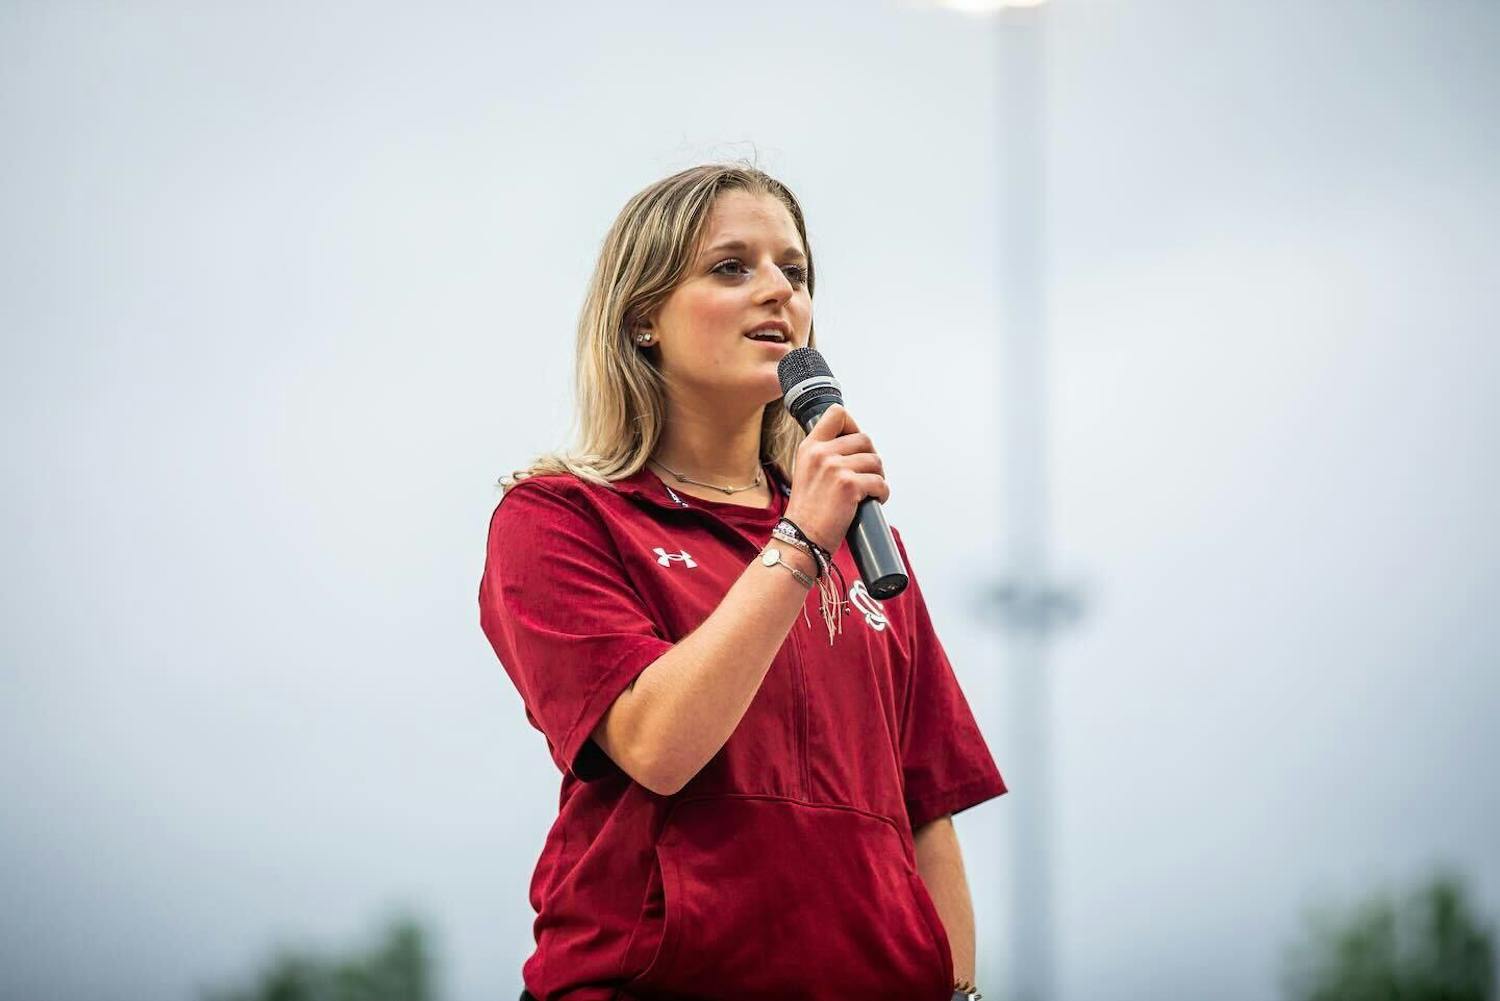 Sydney Herz sings the national anthem before the South Carolina baseball team’s game against Auburn on April 30, 2023. Herz uses her social media accounts to share her love of the game and showcase her life as a college student.